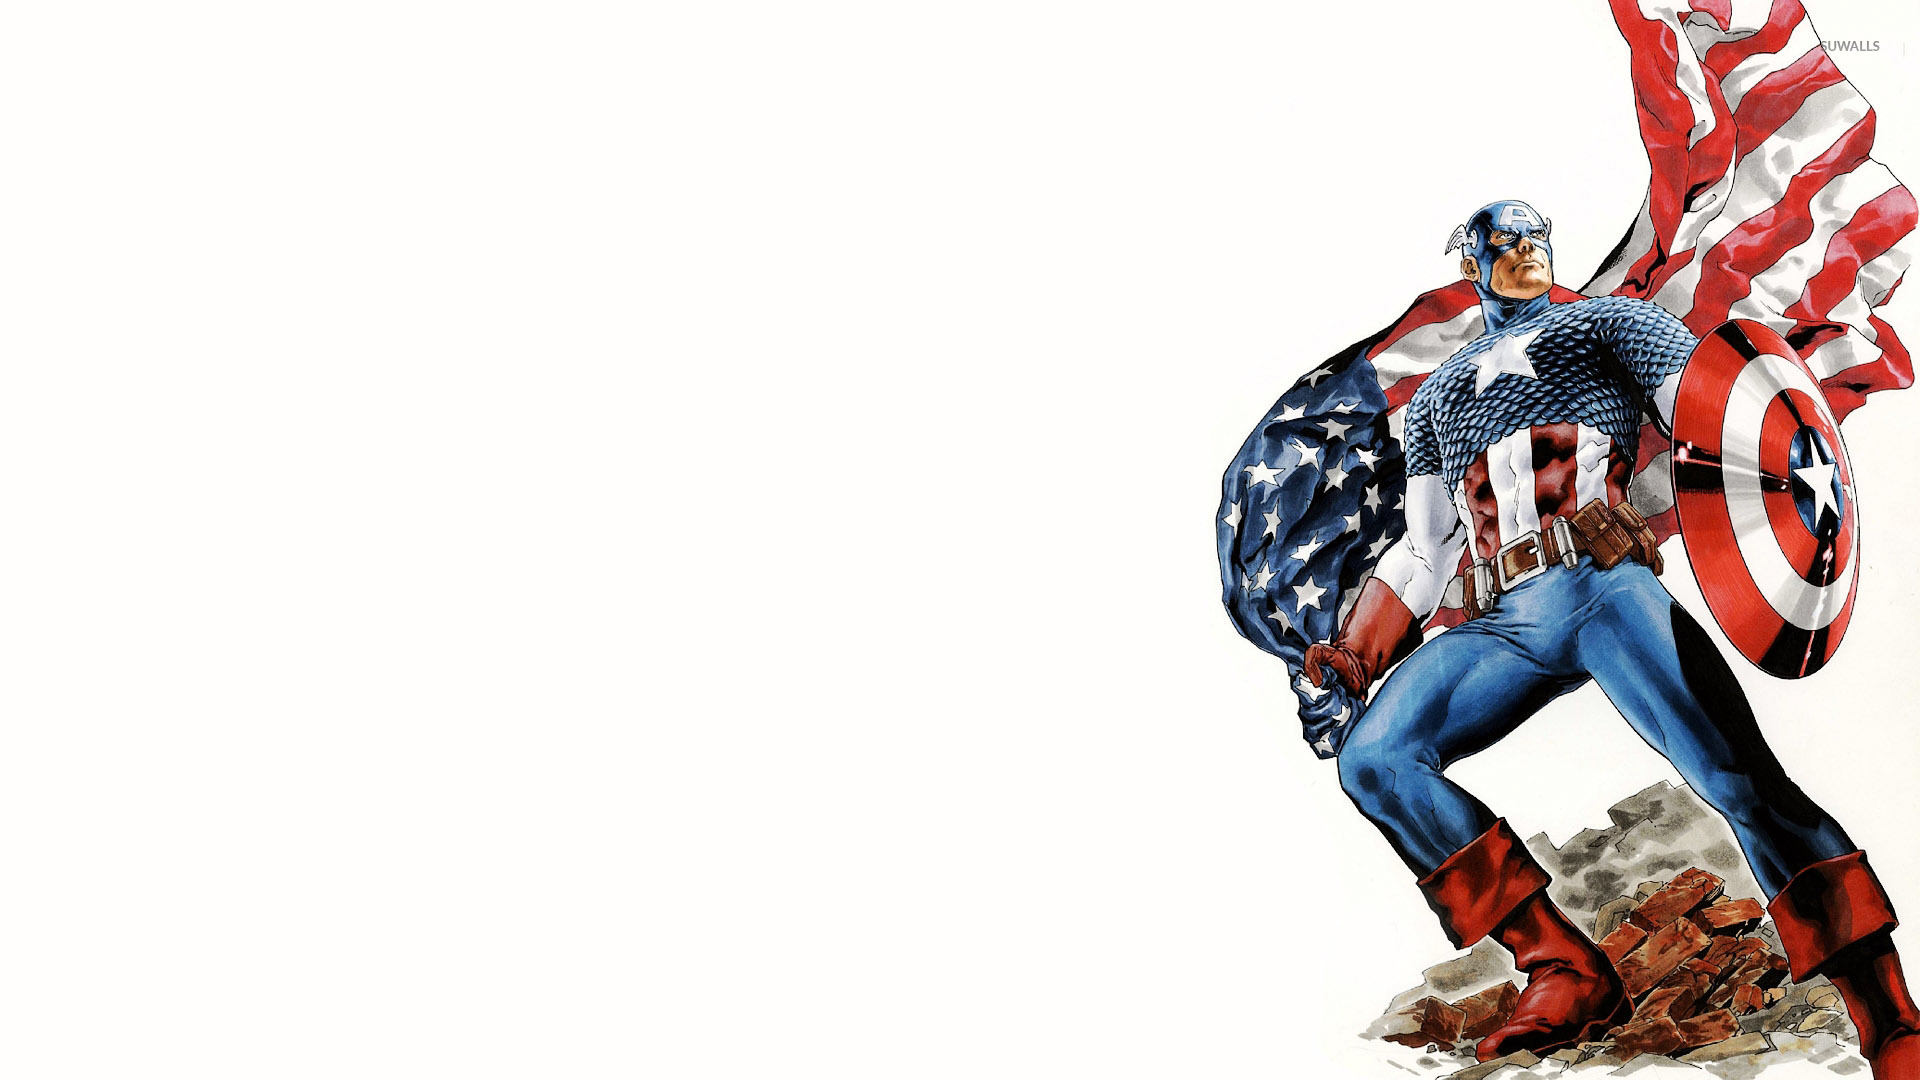 Captain America Comic Wallpapers For Android On Wallpaper - Captain America Comic Background - HD Wallpaper 